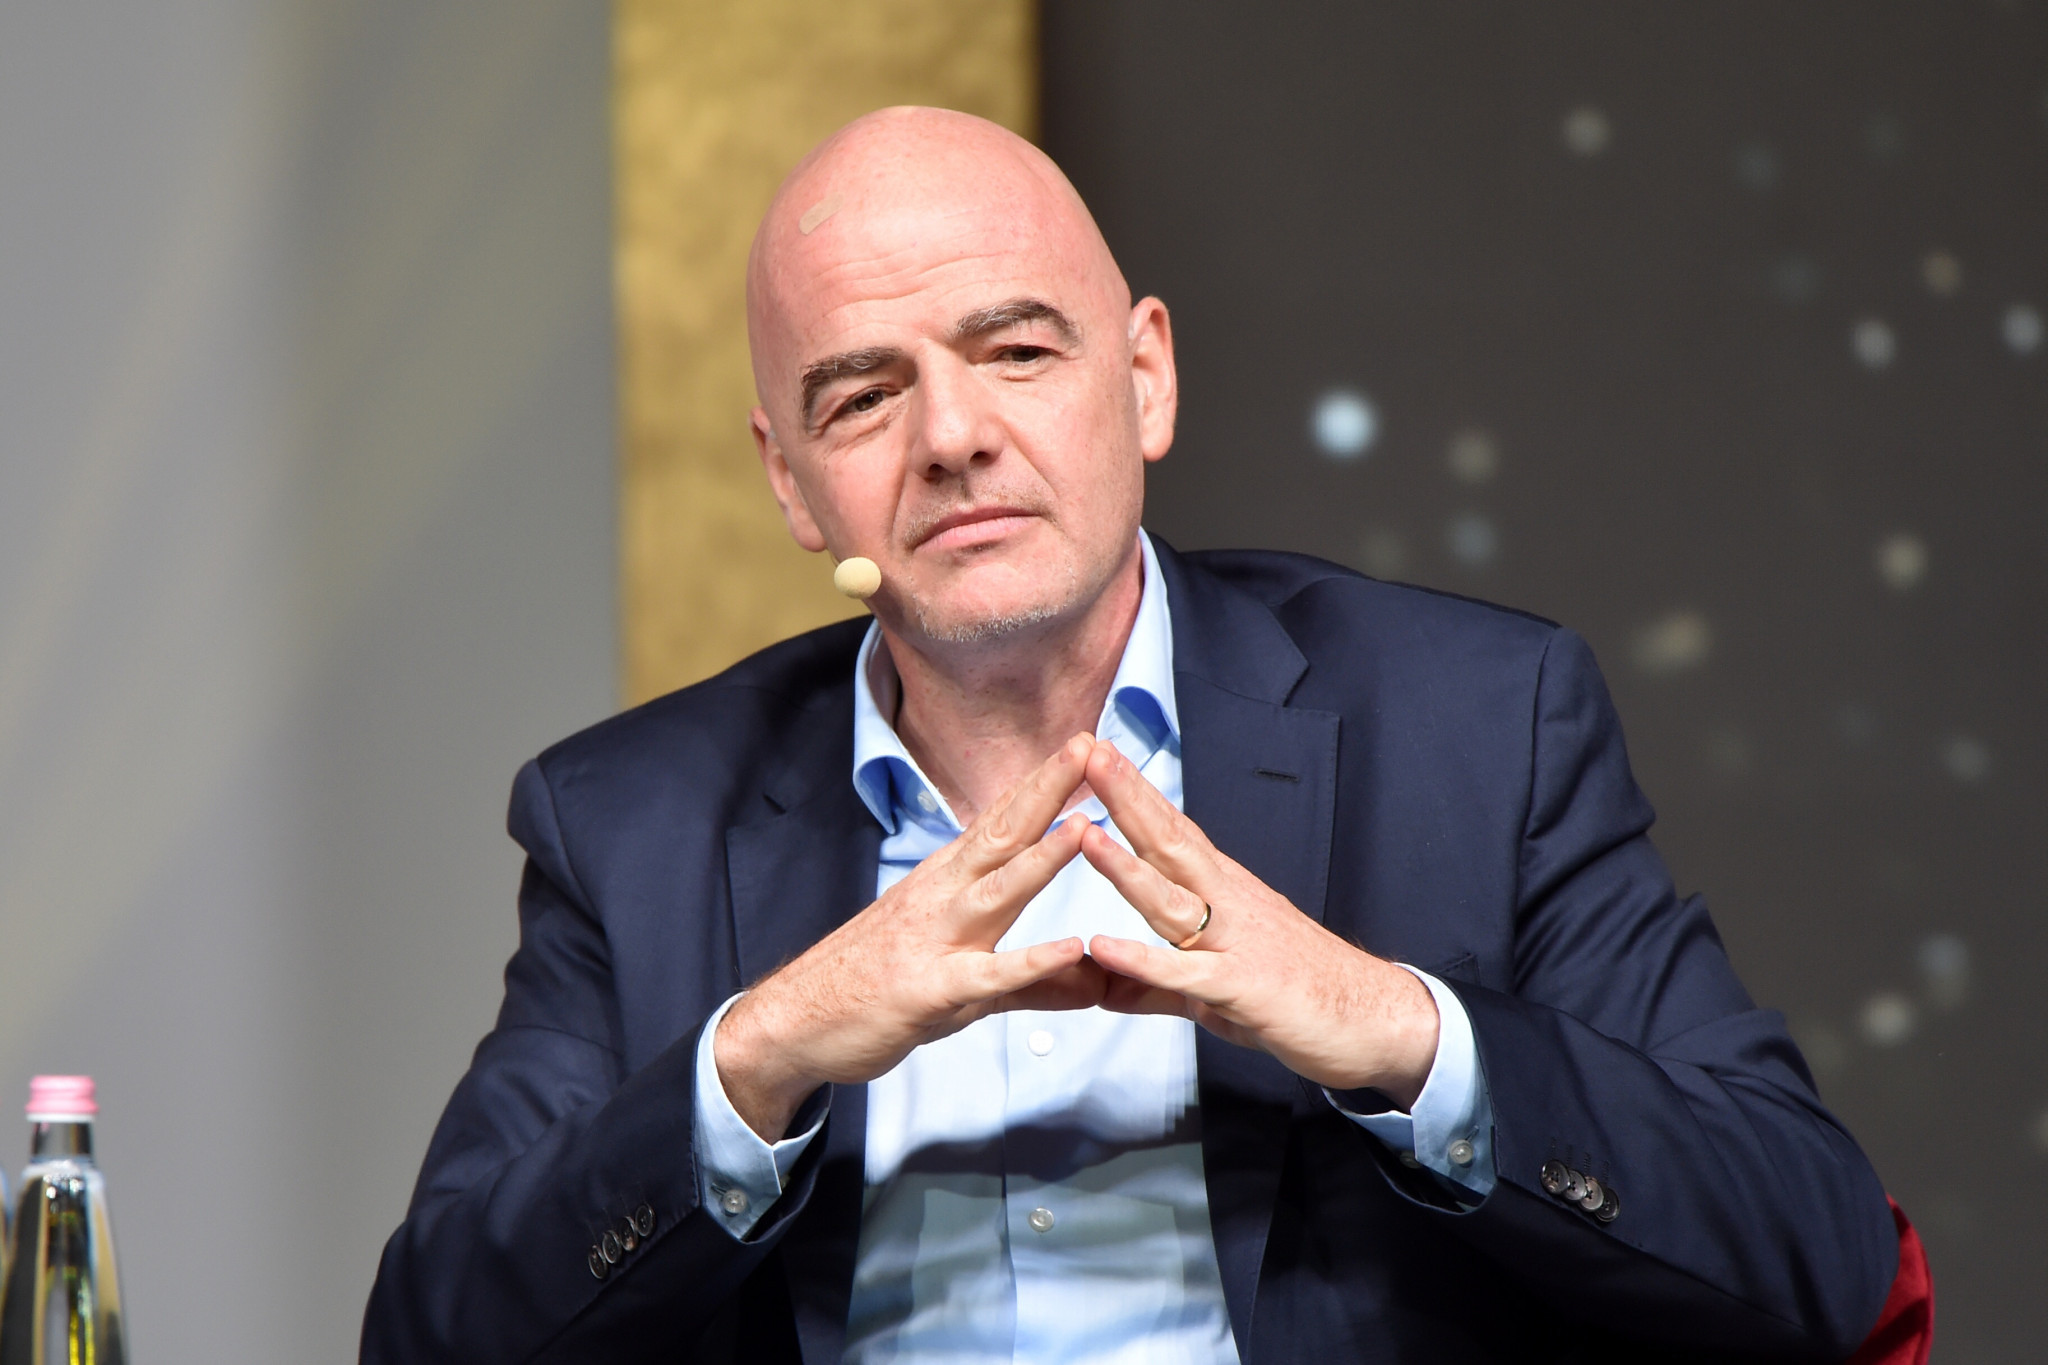 FIFA President Infantino claims there are no "factual grounds" for criminal proceedings